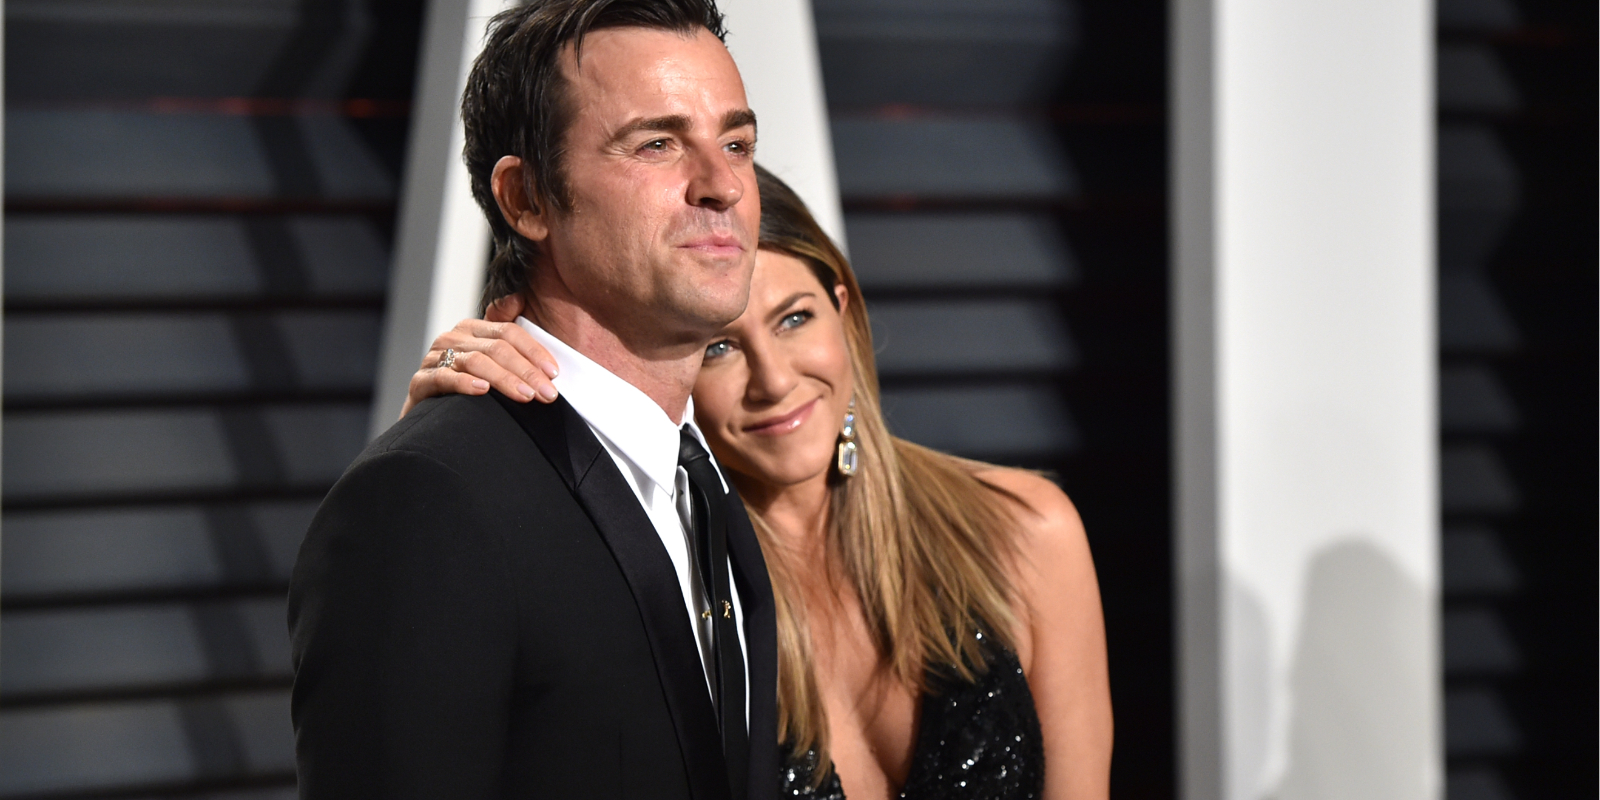 Justin Theroux shared a message to ex-wife Jennifer Aniston on Instagram regarding her father John's death.